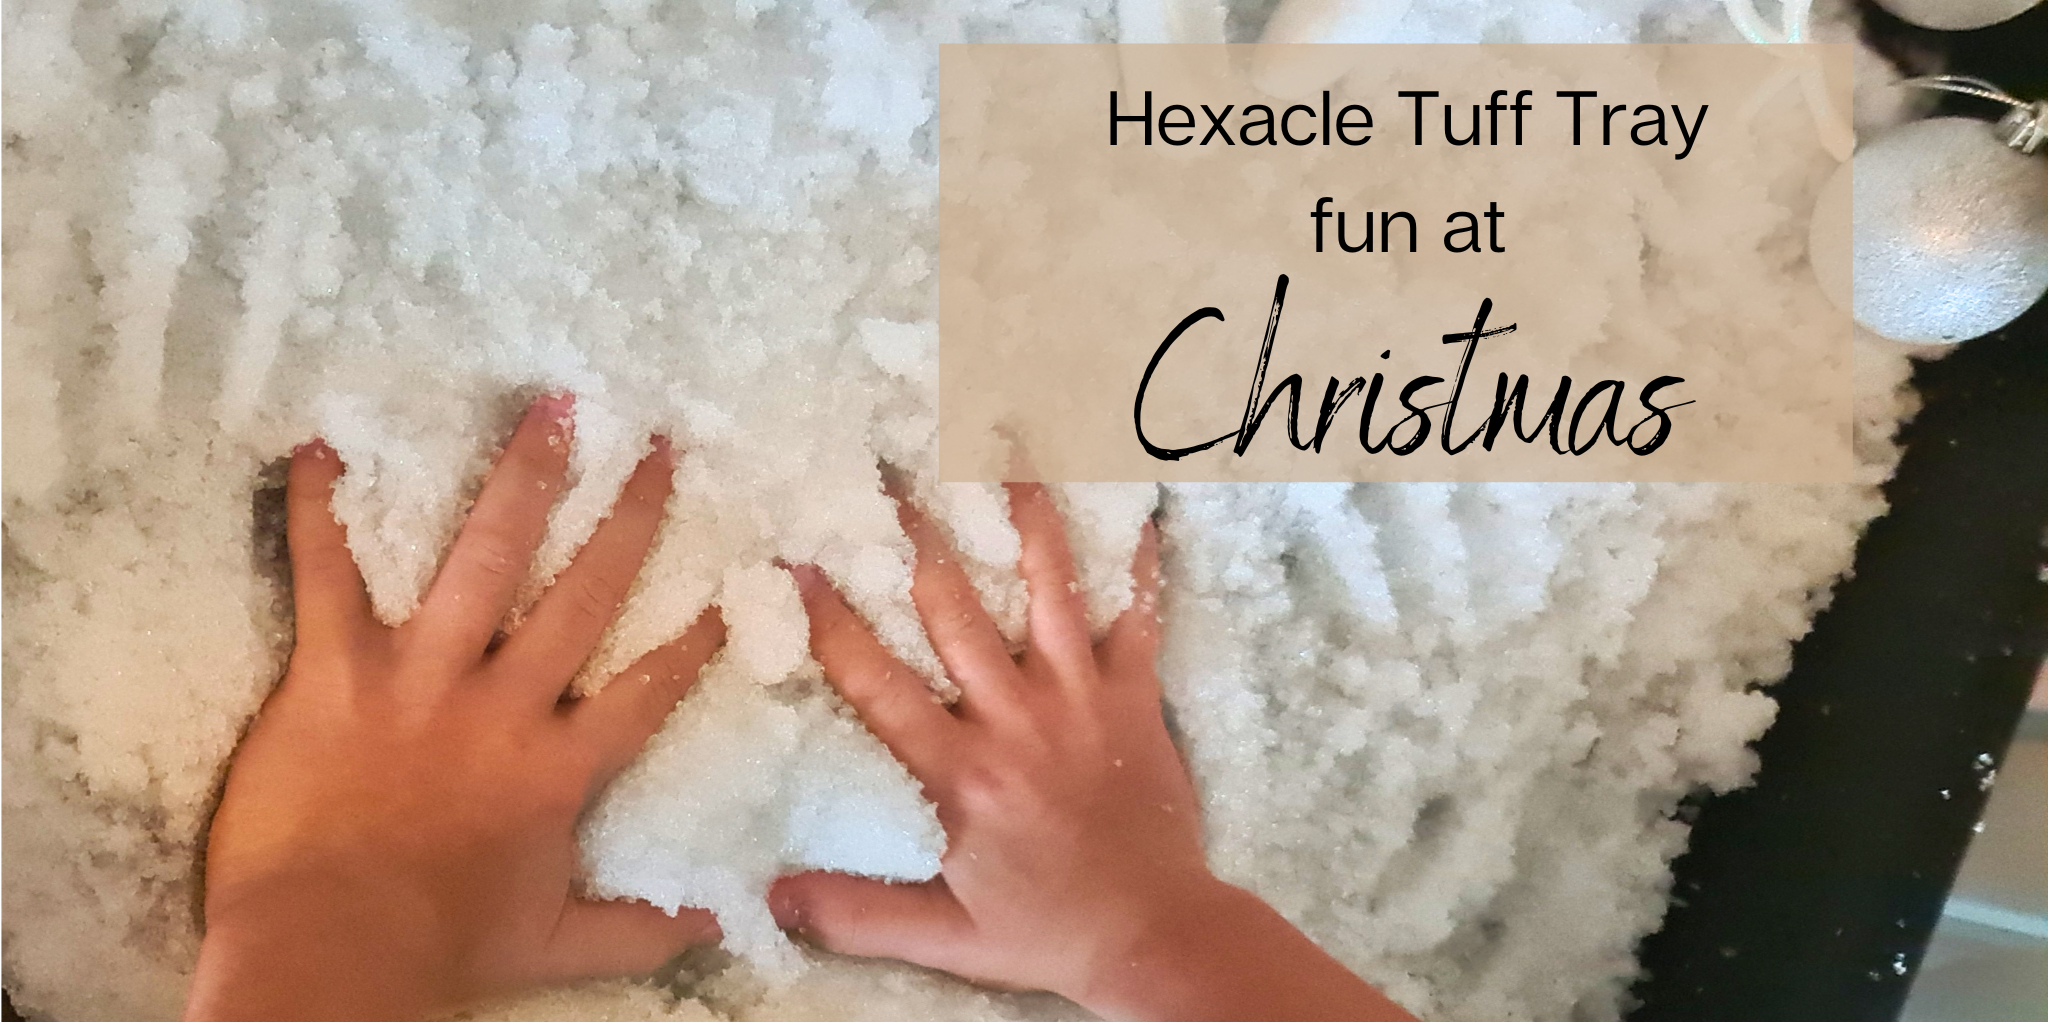 Christmas indoor activities with the Kub Hexacle Tuff tray and stand